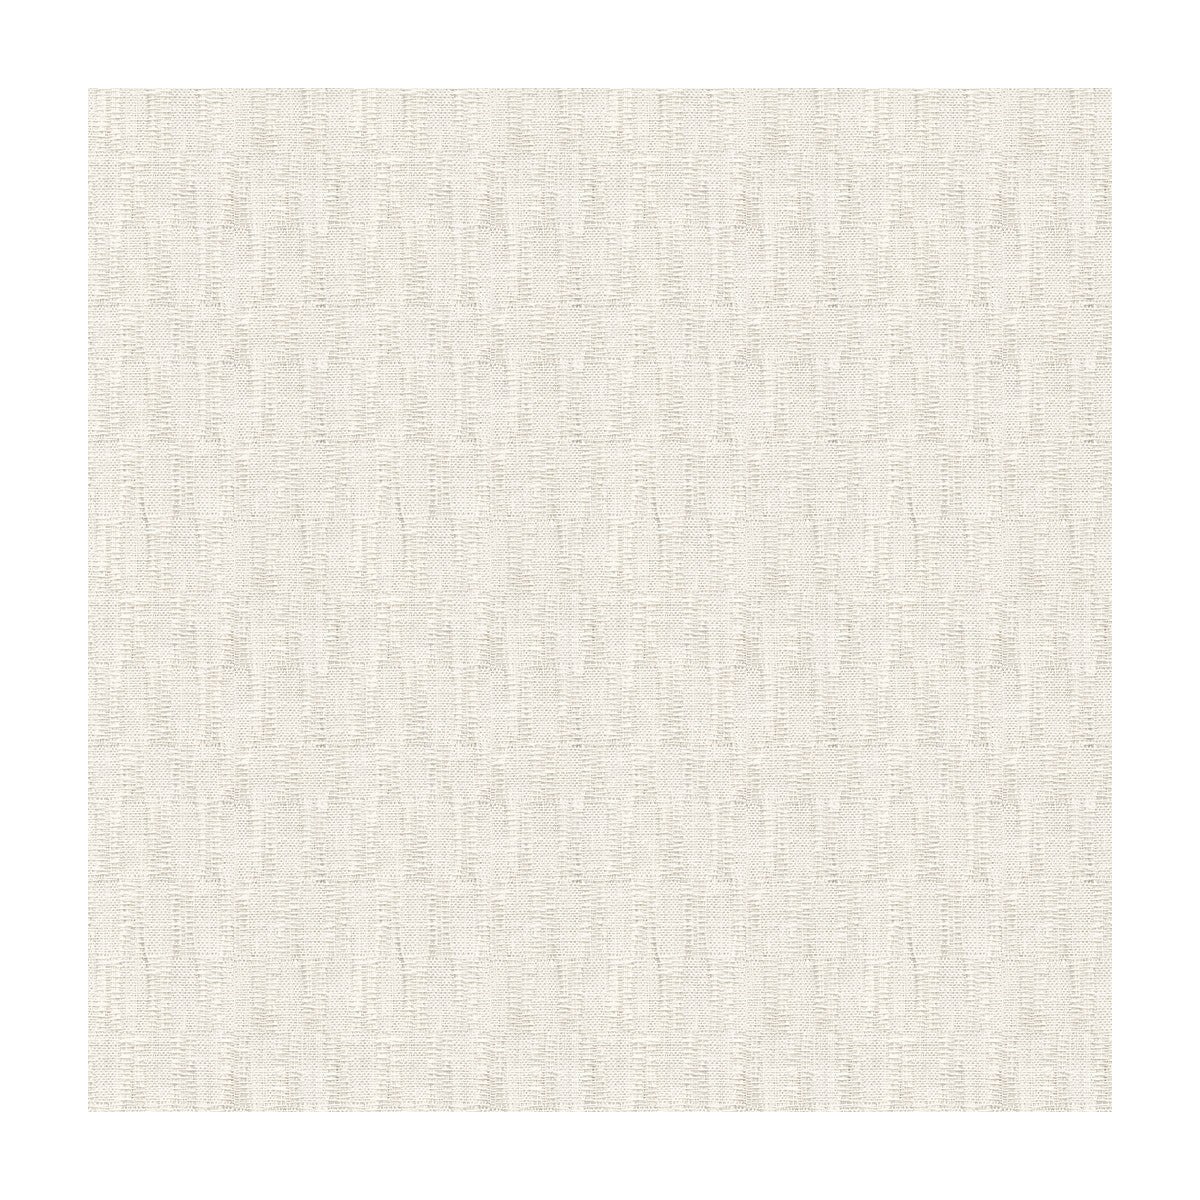 Kravet Contract fabric in 4163-101 color - pattern 4163.101.0 - by Kravet Contract